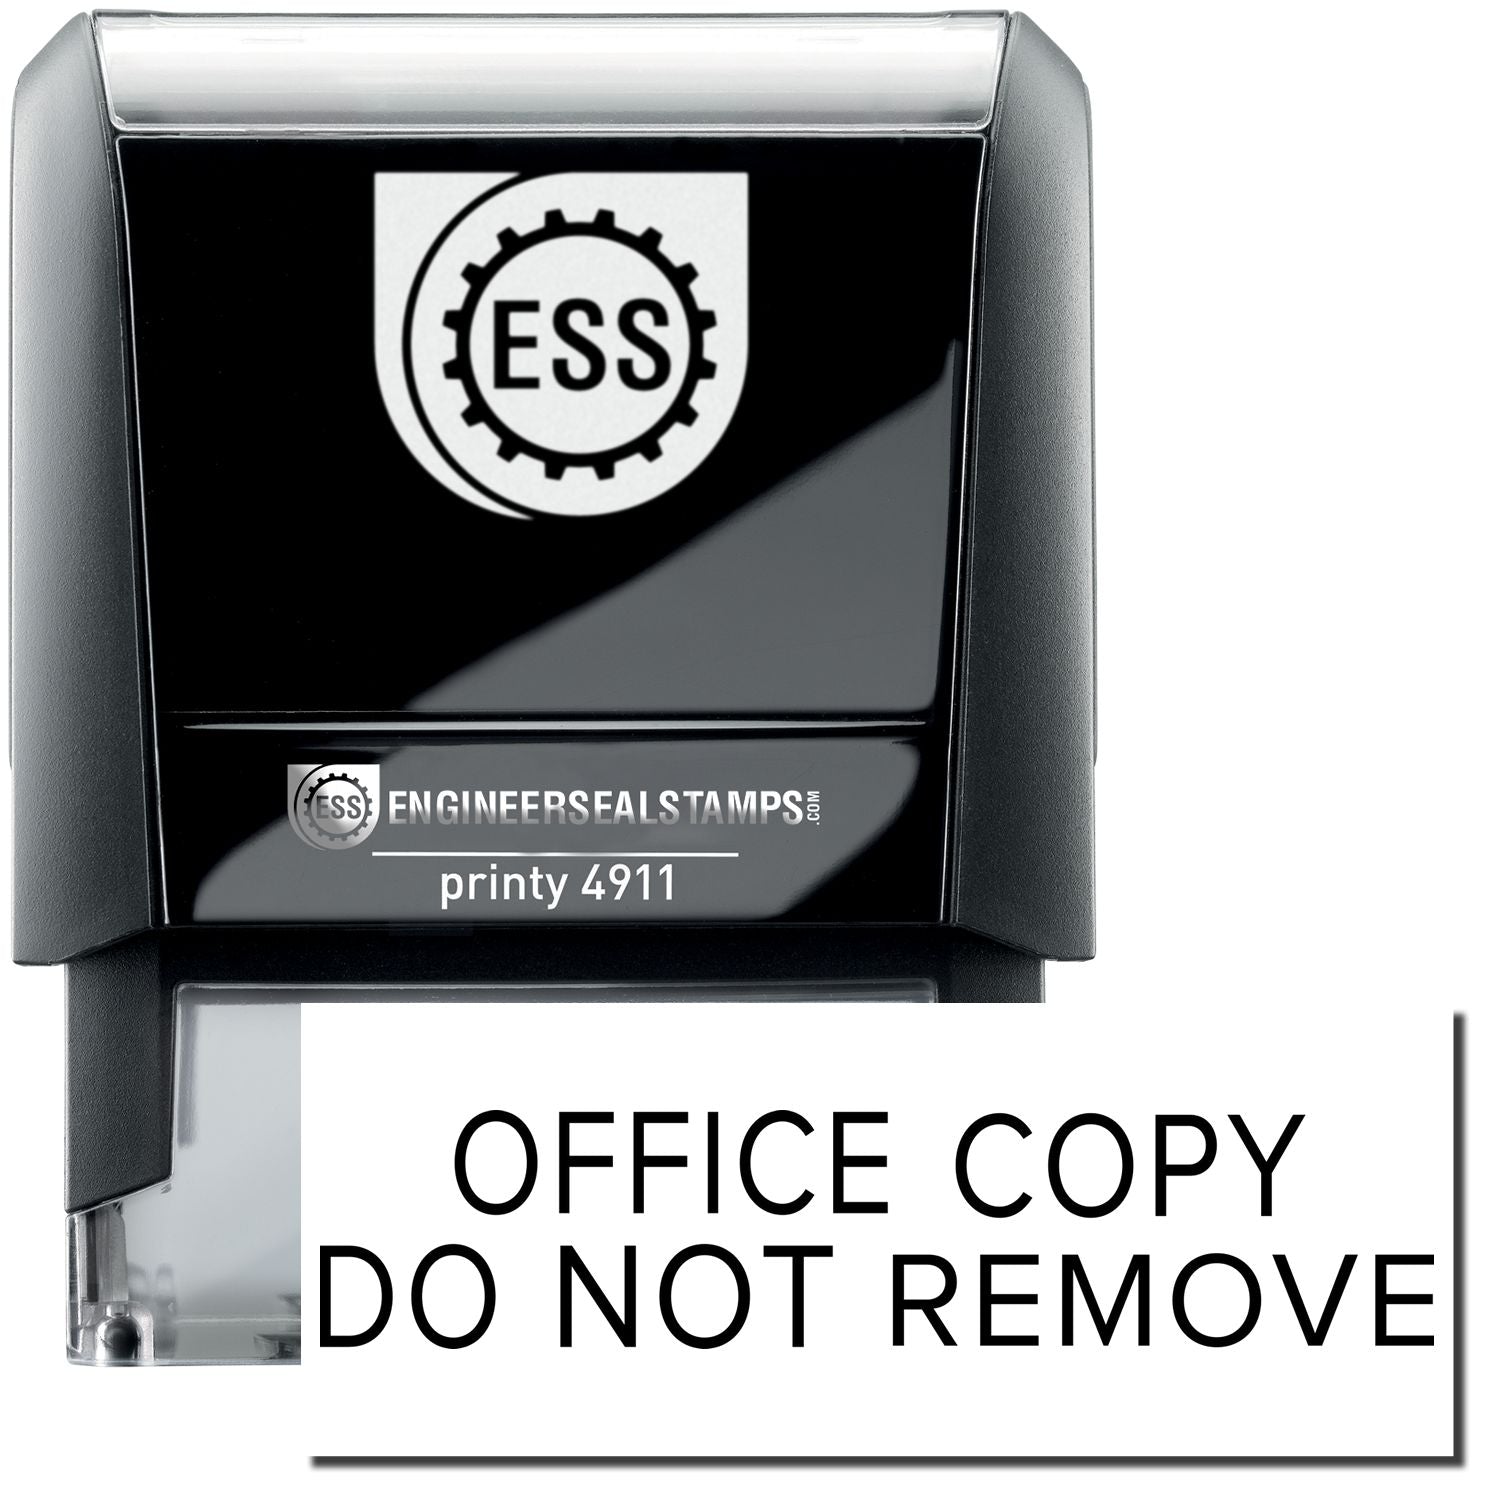 A self-inking stamp with a stamped image showing how the text "OFFICE COPY DO NOT REMOVE" in a narrow font is displayed after stamping.